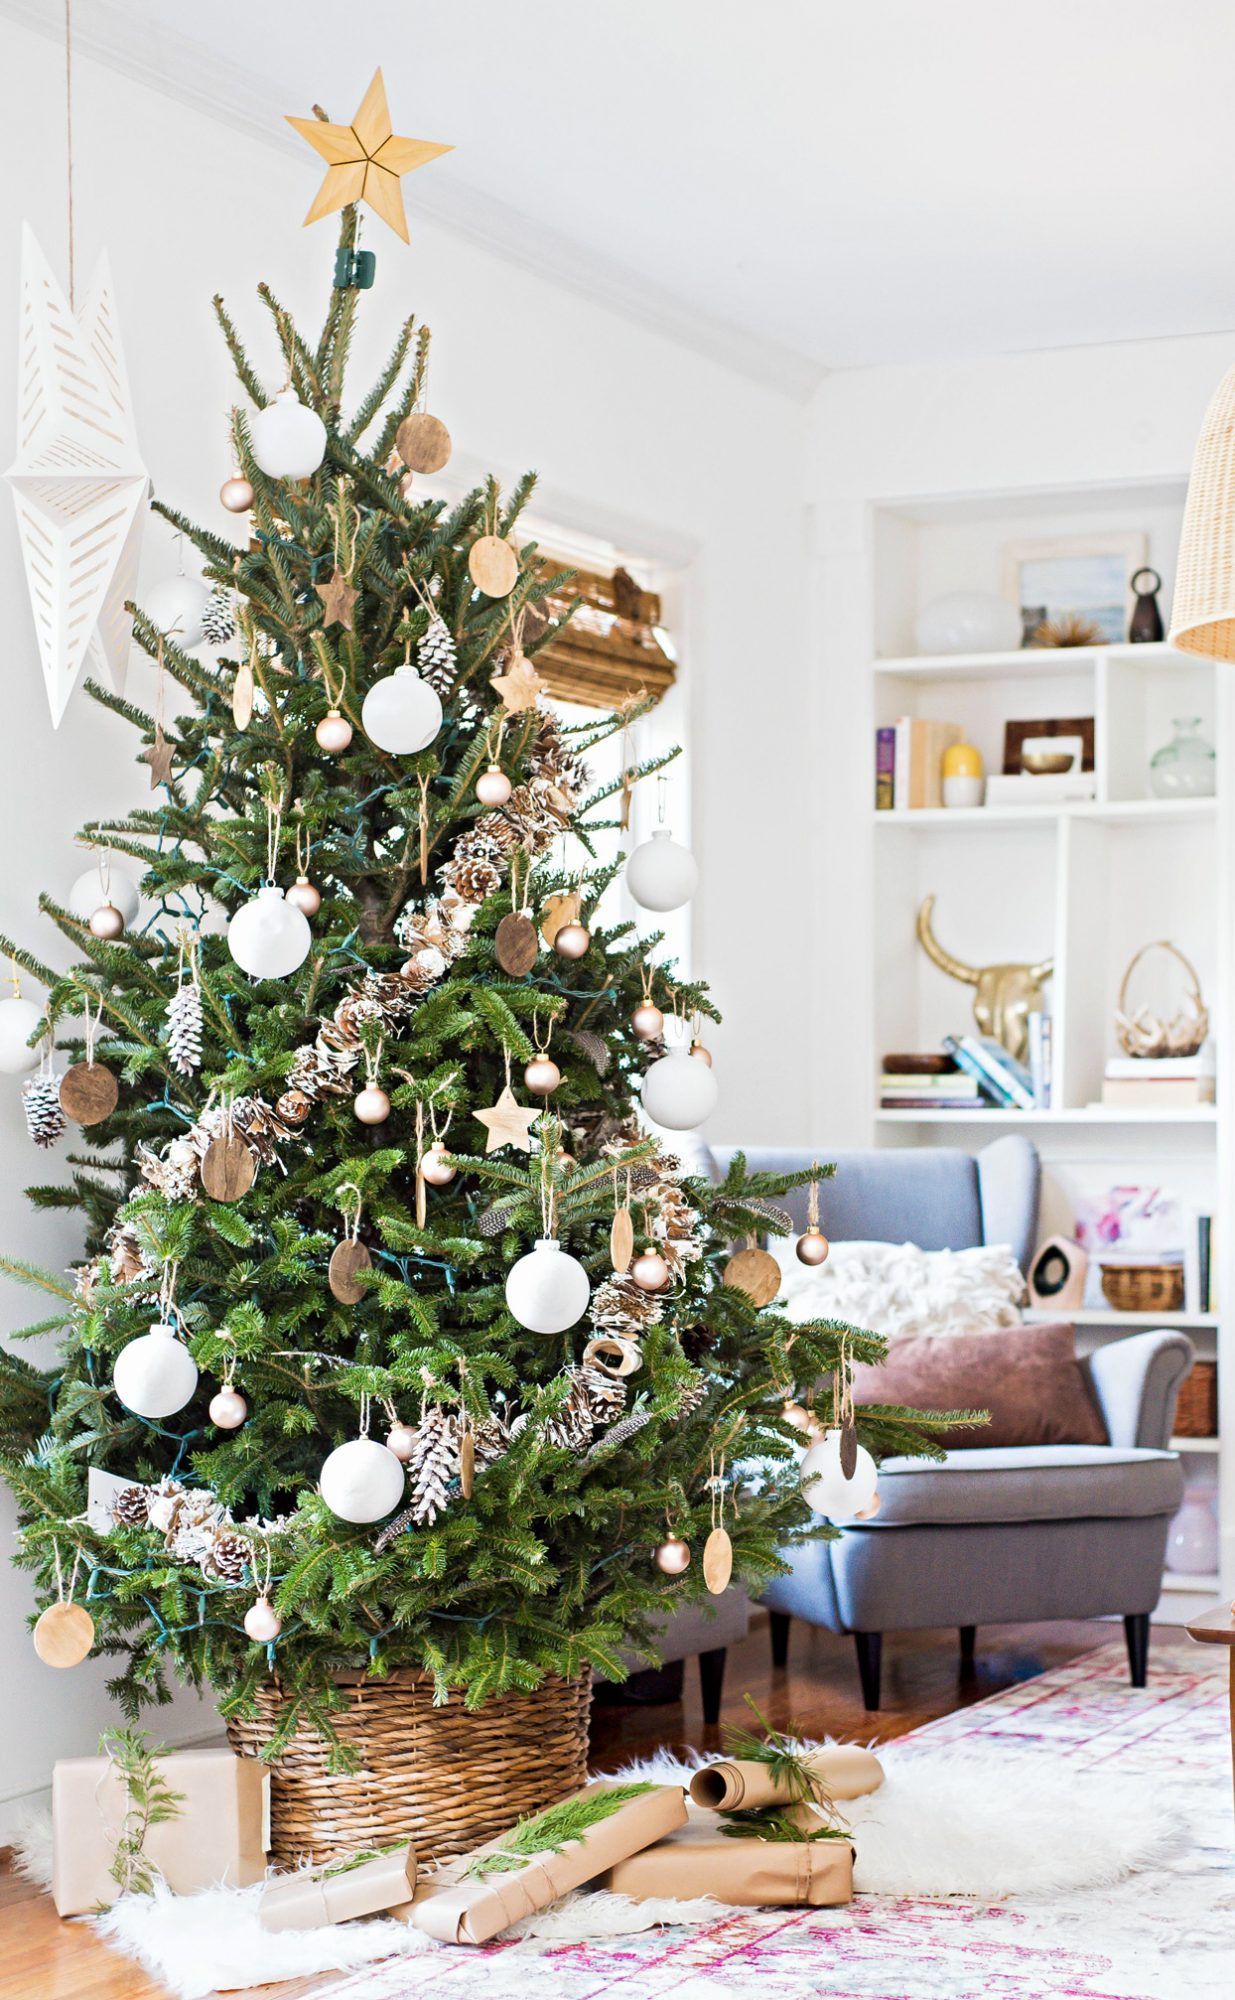 The 7 Christmas Trends That Will be Huge This Year - The 7 Christmas Trends That Will be Huge This Year -   17 christmas tree decorations 2020 trends ideas